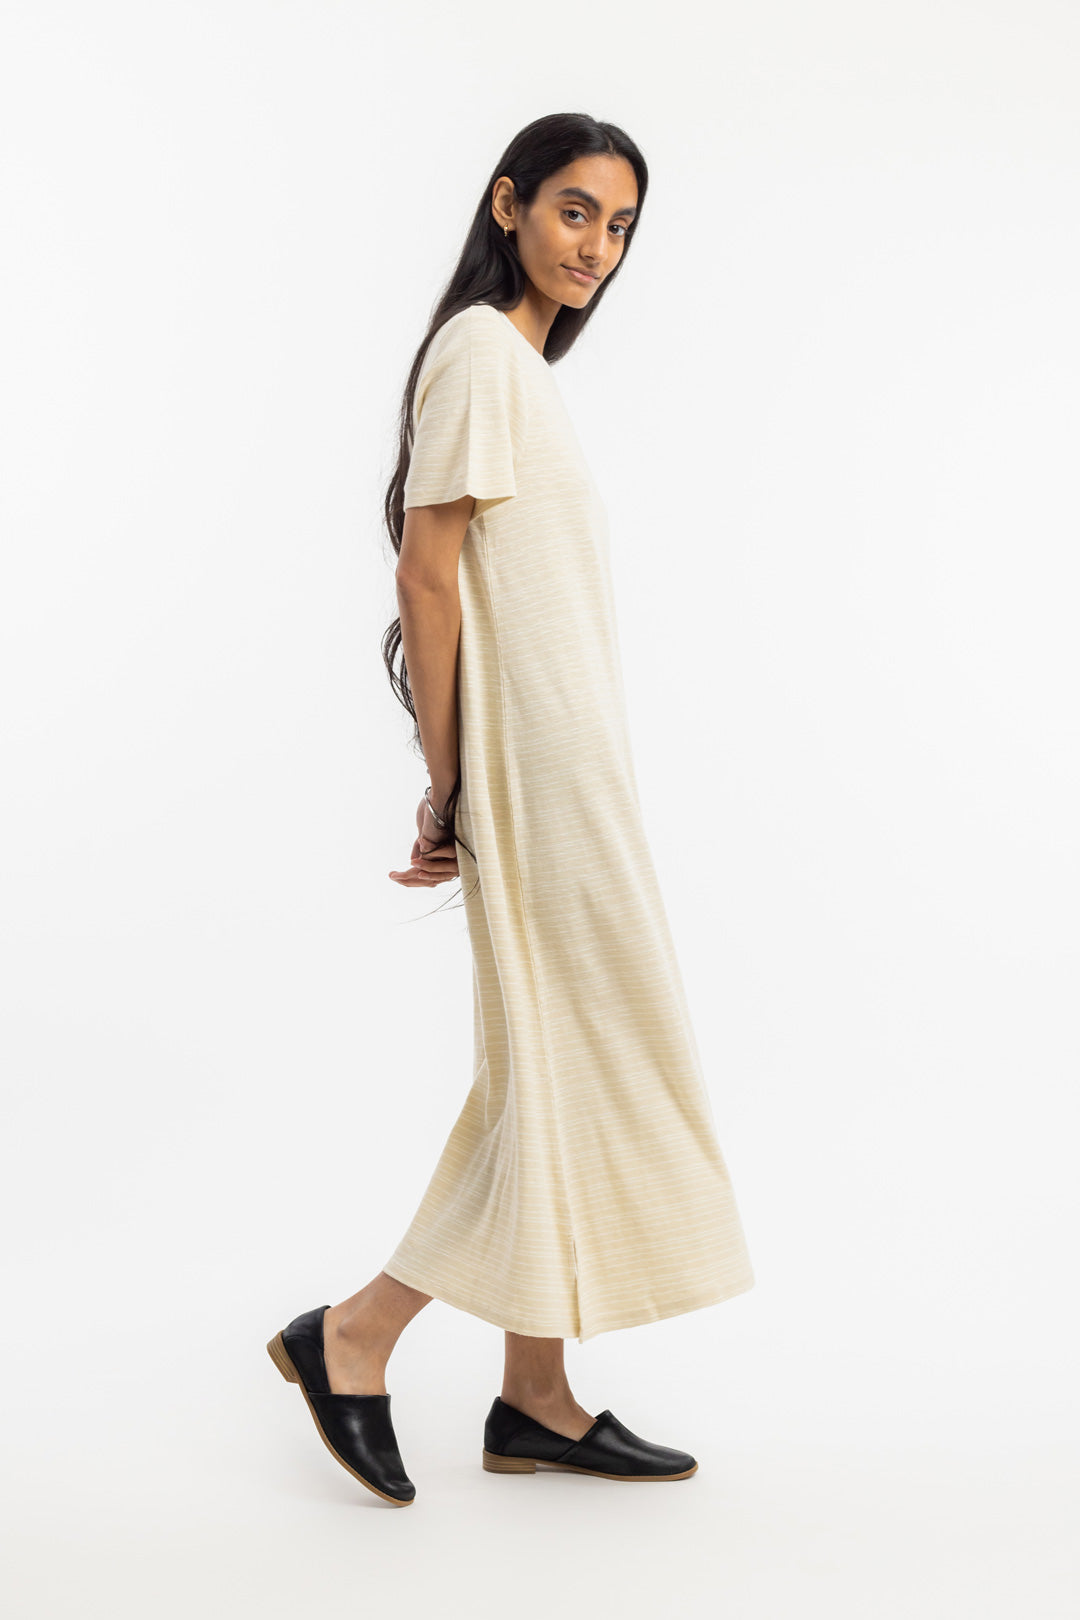 Beige T-shirt dress made from 100% organic cotton from Rotholz